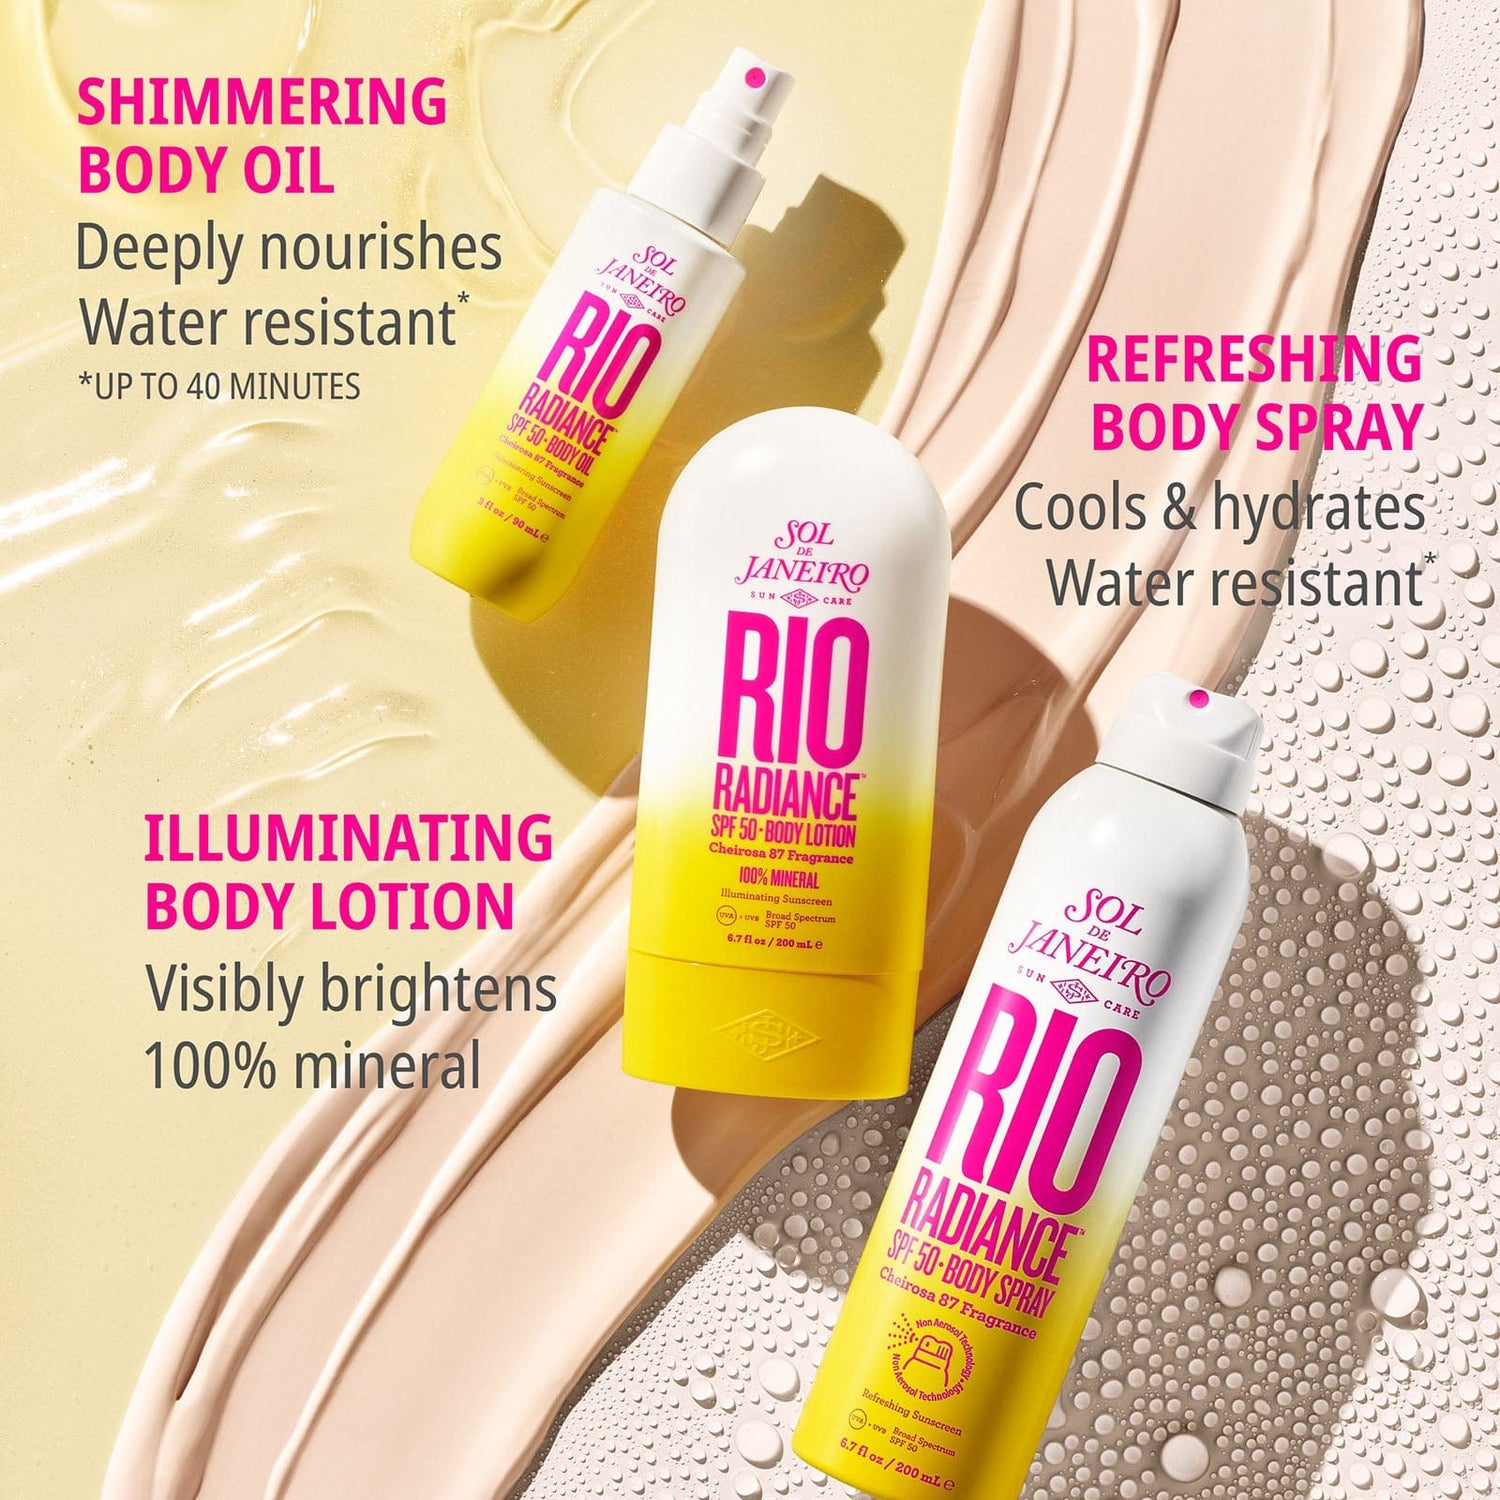 Shimmering body oil - deeply nourishes water resistant* Refreshing body spray - cools &amp; hydrates water resistant. Illuminating body lotion - visibly brightens 100% mineral 